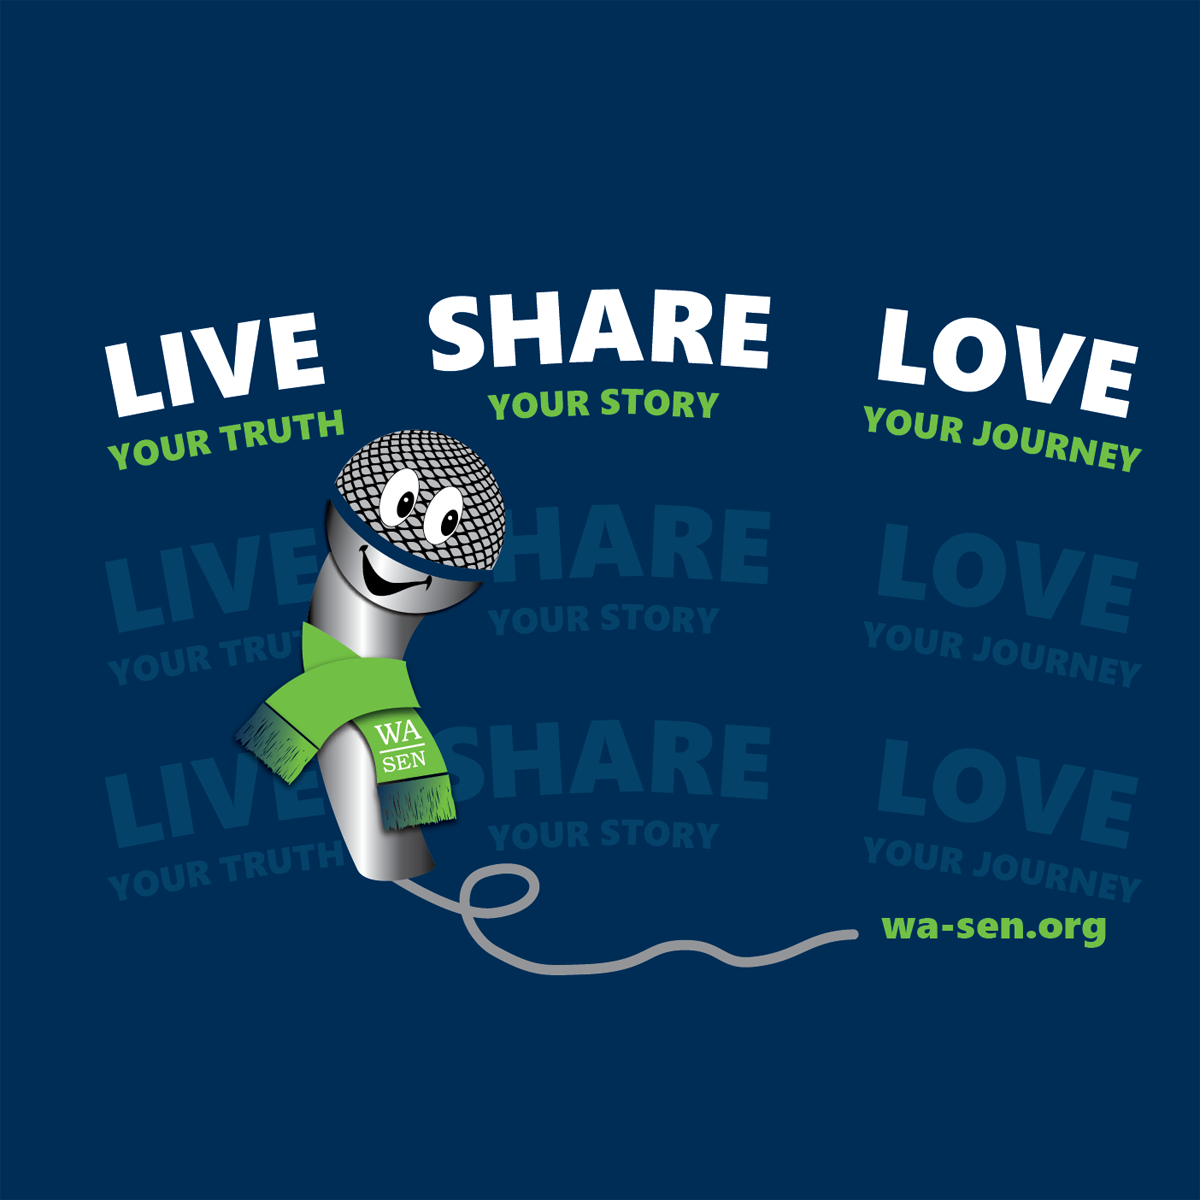 Live your truth. Share your story. Love your journey. With cartoon mic logo.